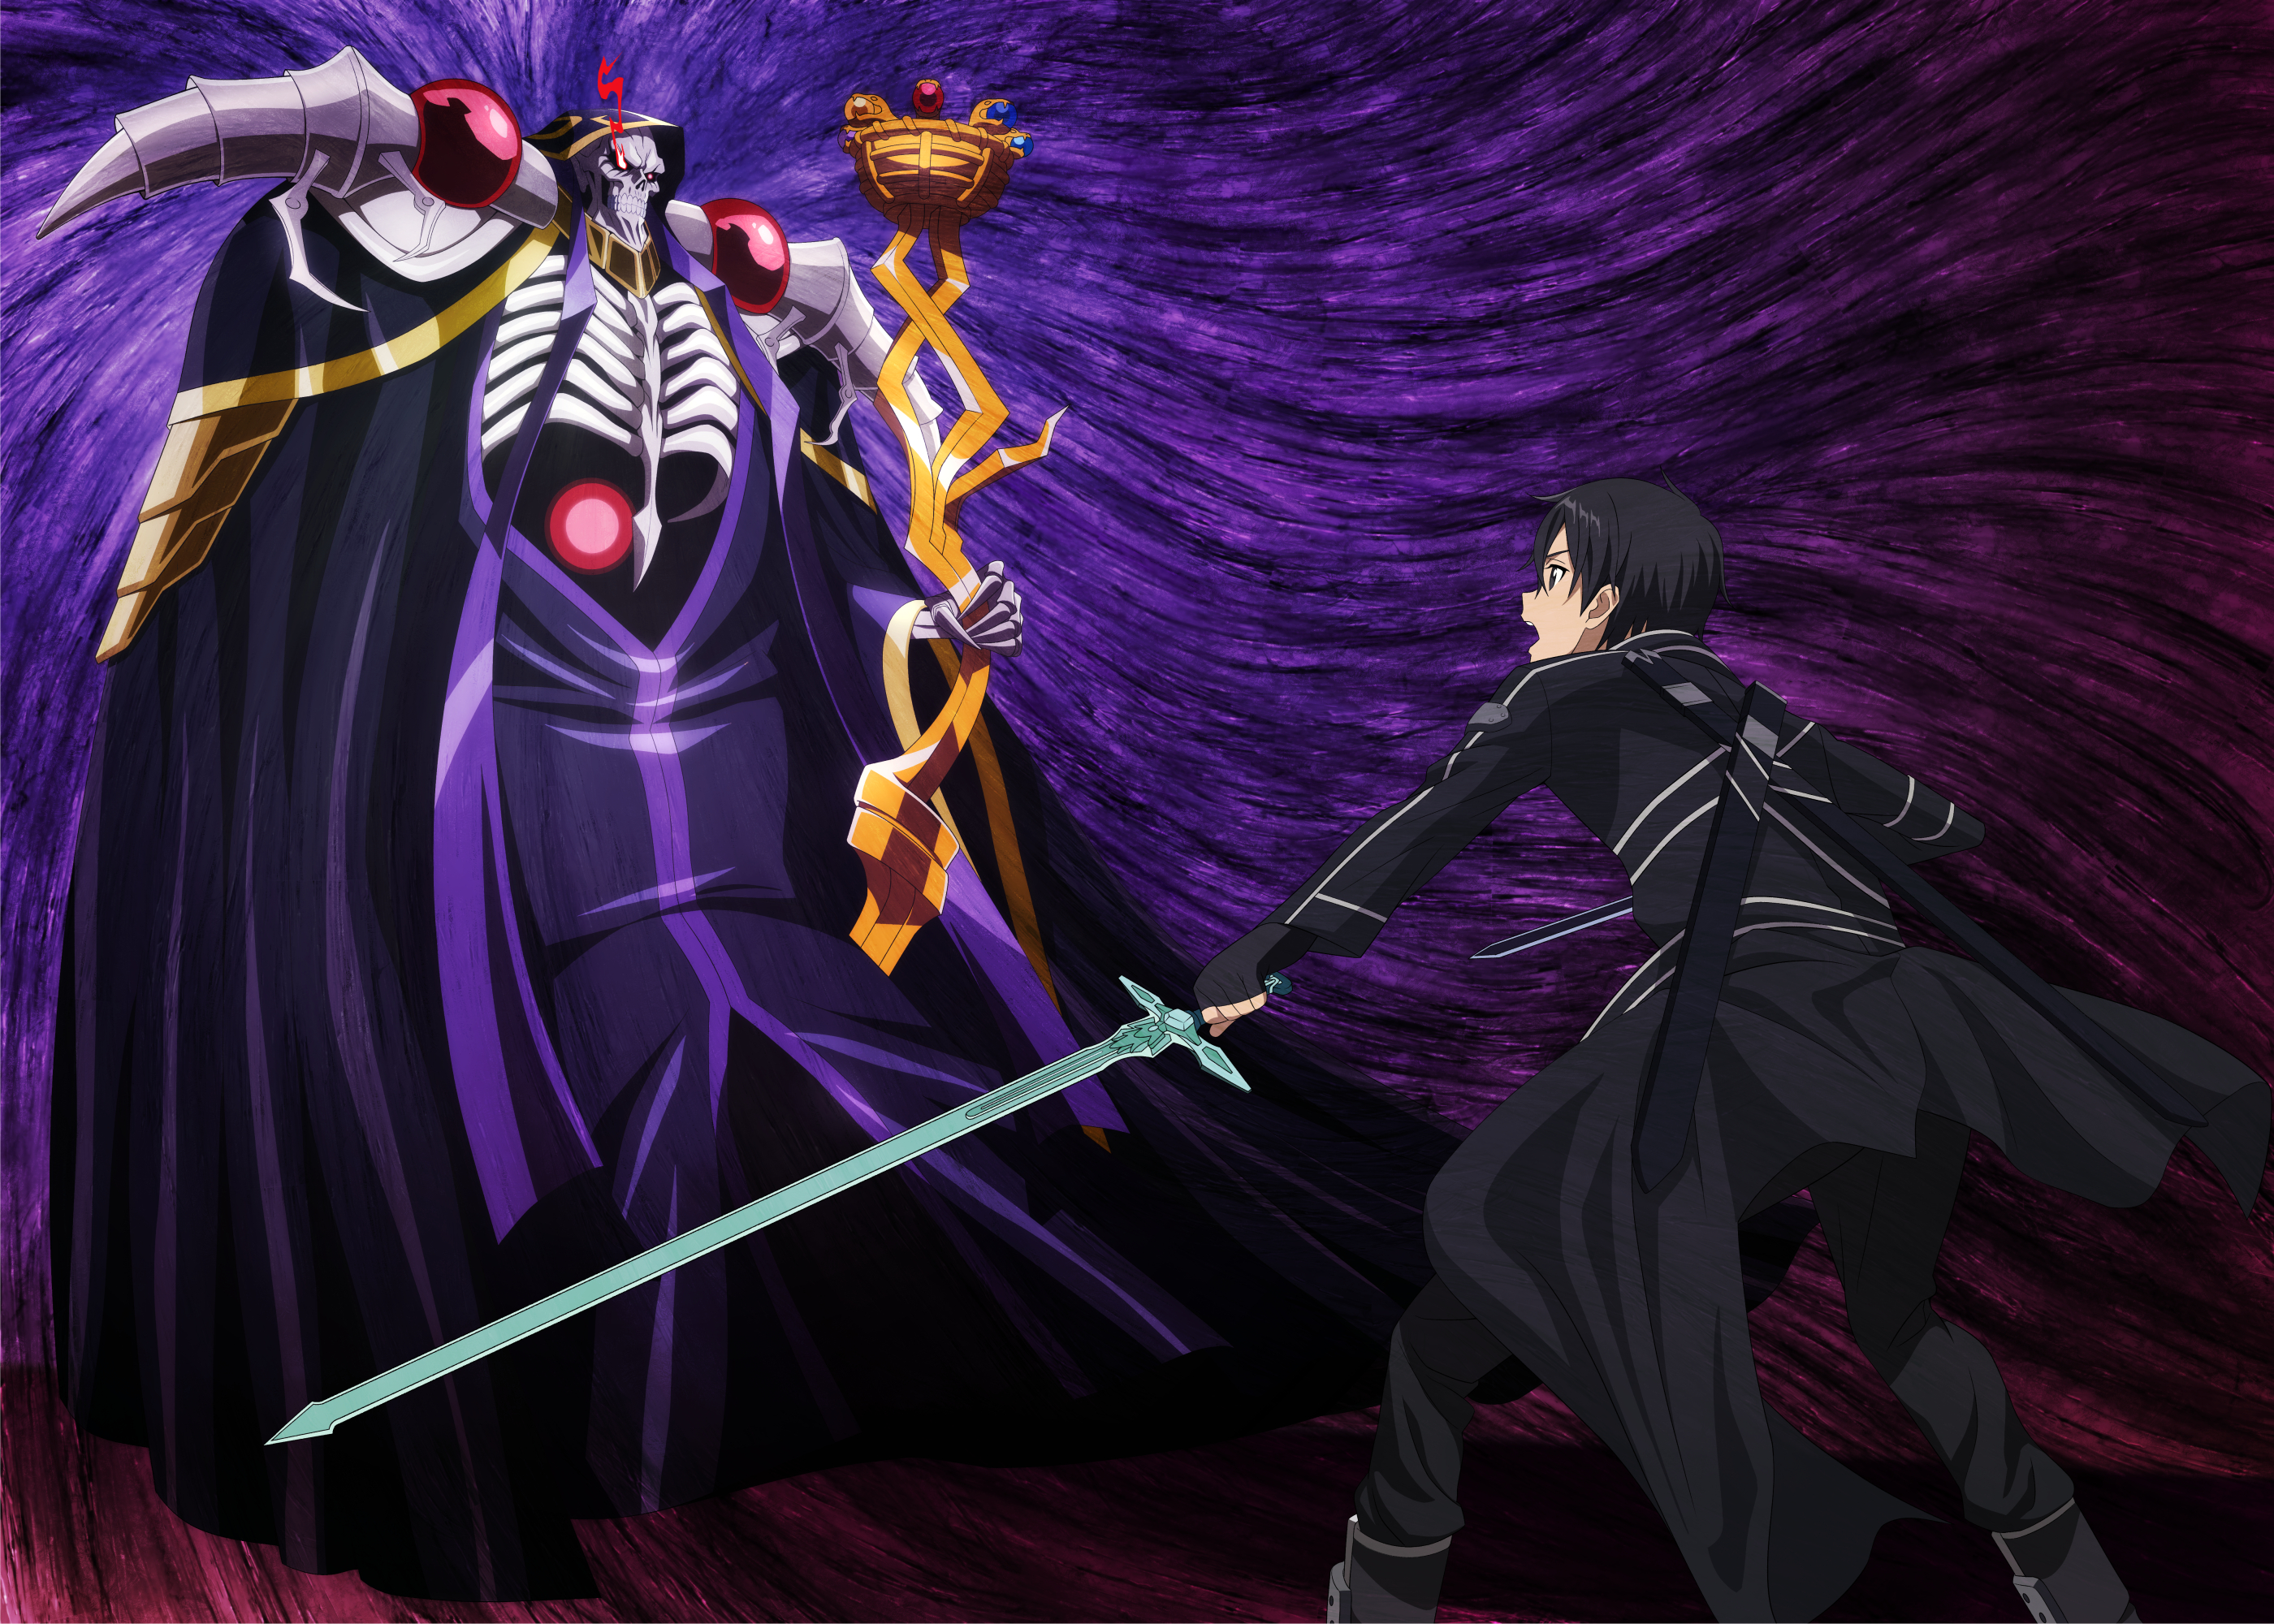 Anime 2800x2000 Overlord Sword Art Online crossover